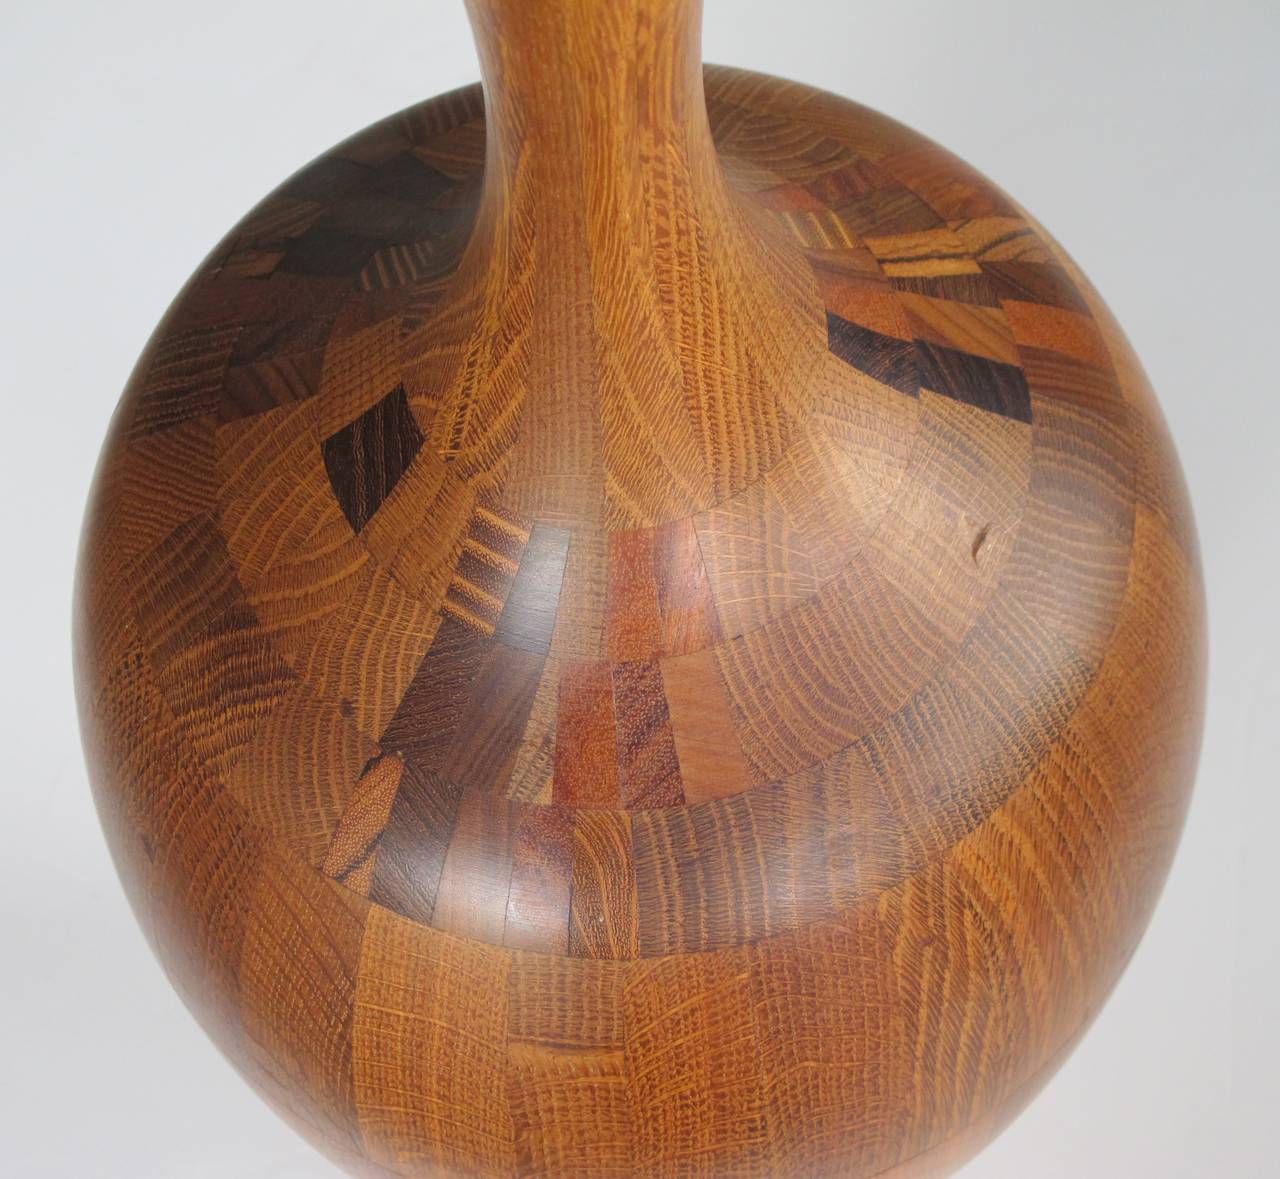 A large-scaled and well-executed French Mid-Century laminated and turned wooden urn; the slender flaring neck above an ovoid body; composed of various laminated wooden sections turned on a lathe.